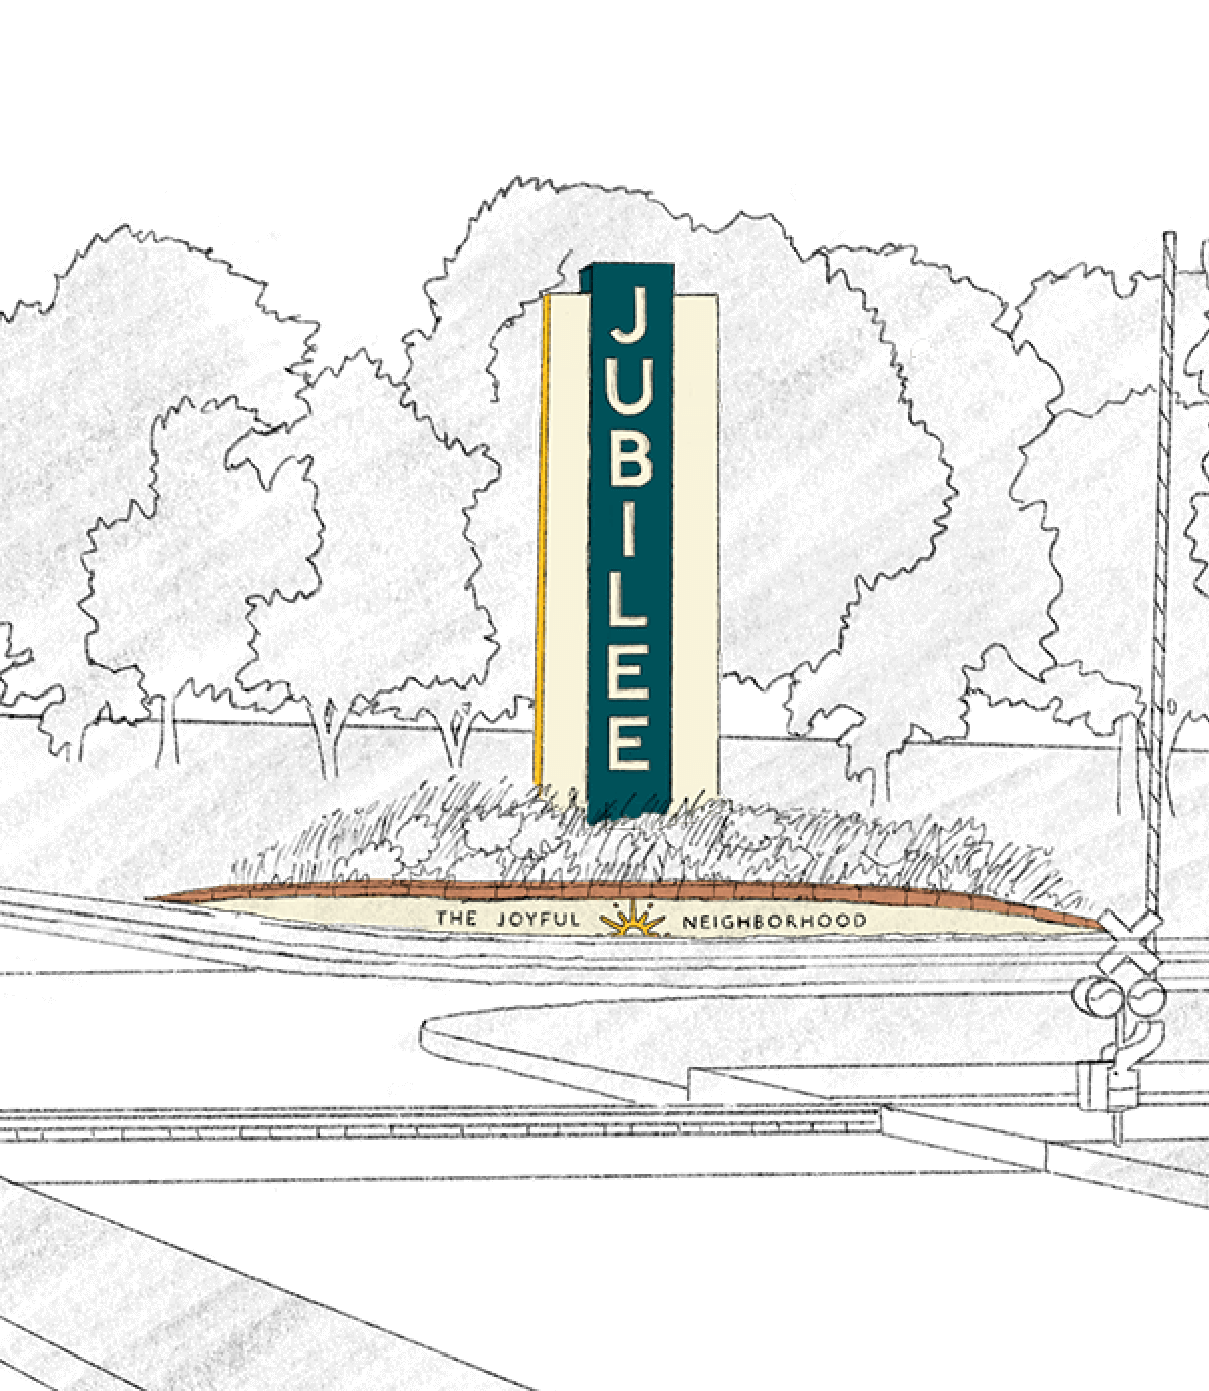 ST8MNT sketch for Jubilee monument signage for Texas master-planned community